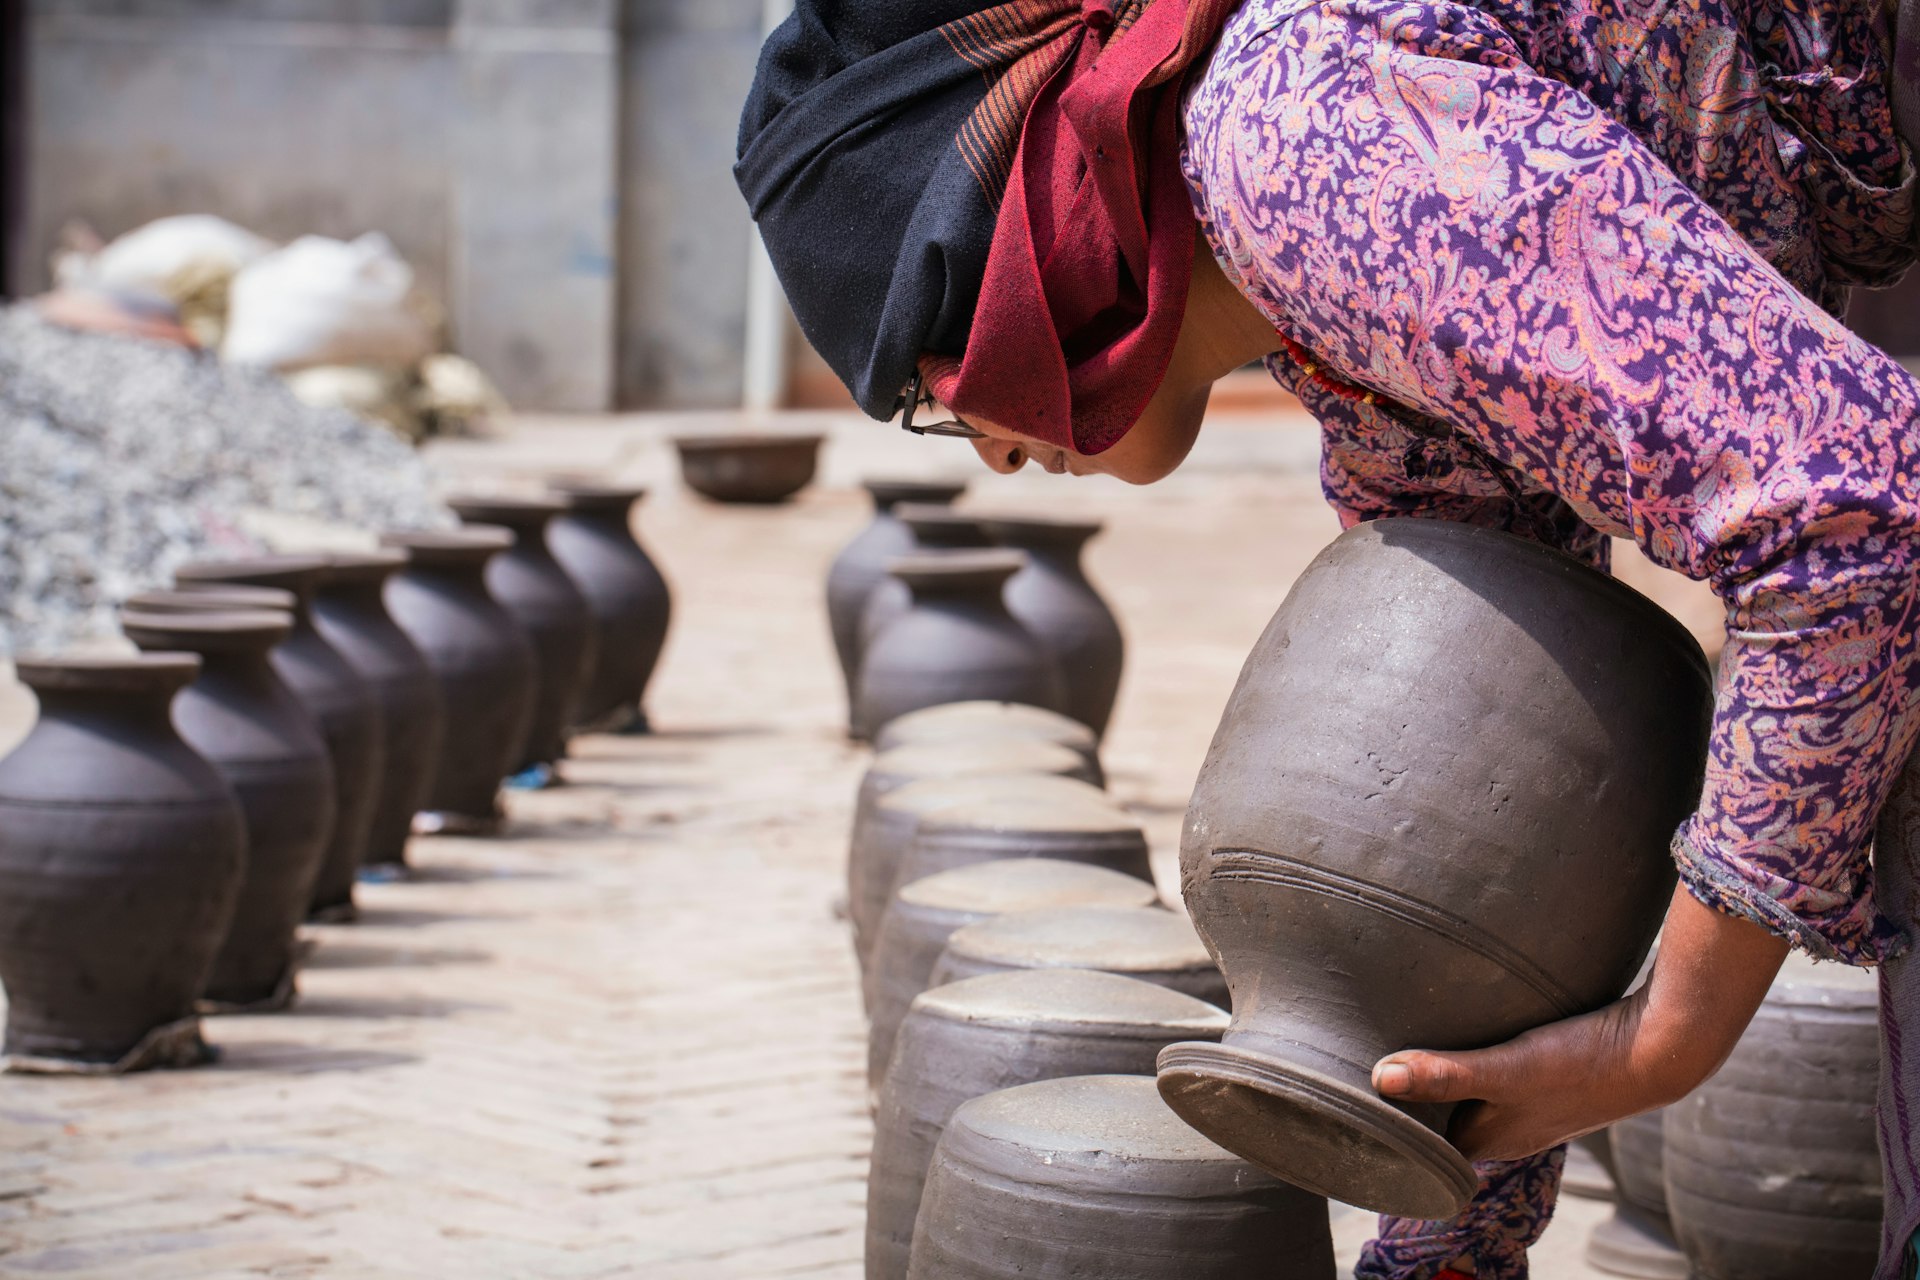 Nepalese woman drying raw clay pot on her workshop, Madhyapur Thimi, Bhaktapur District, Nepal